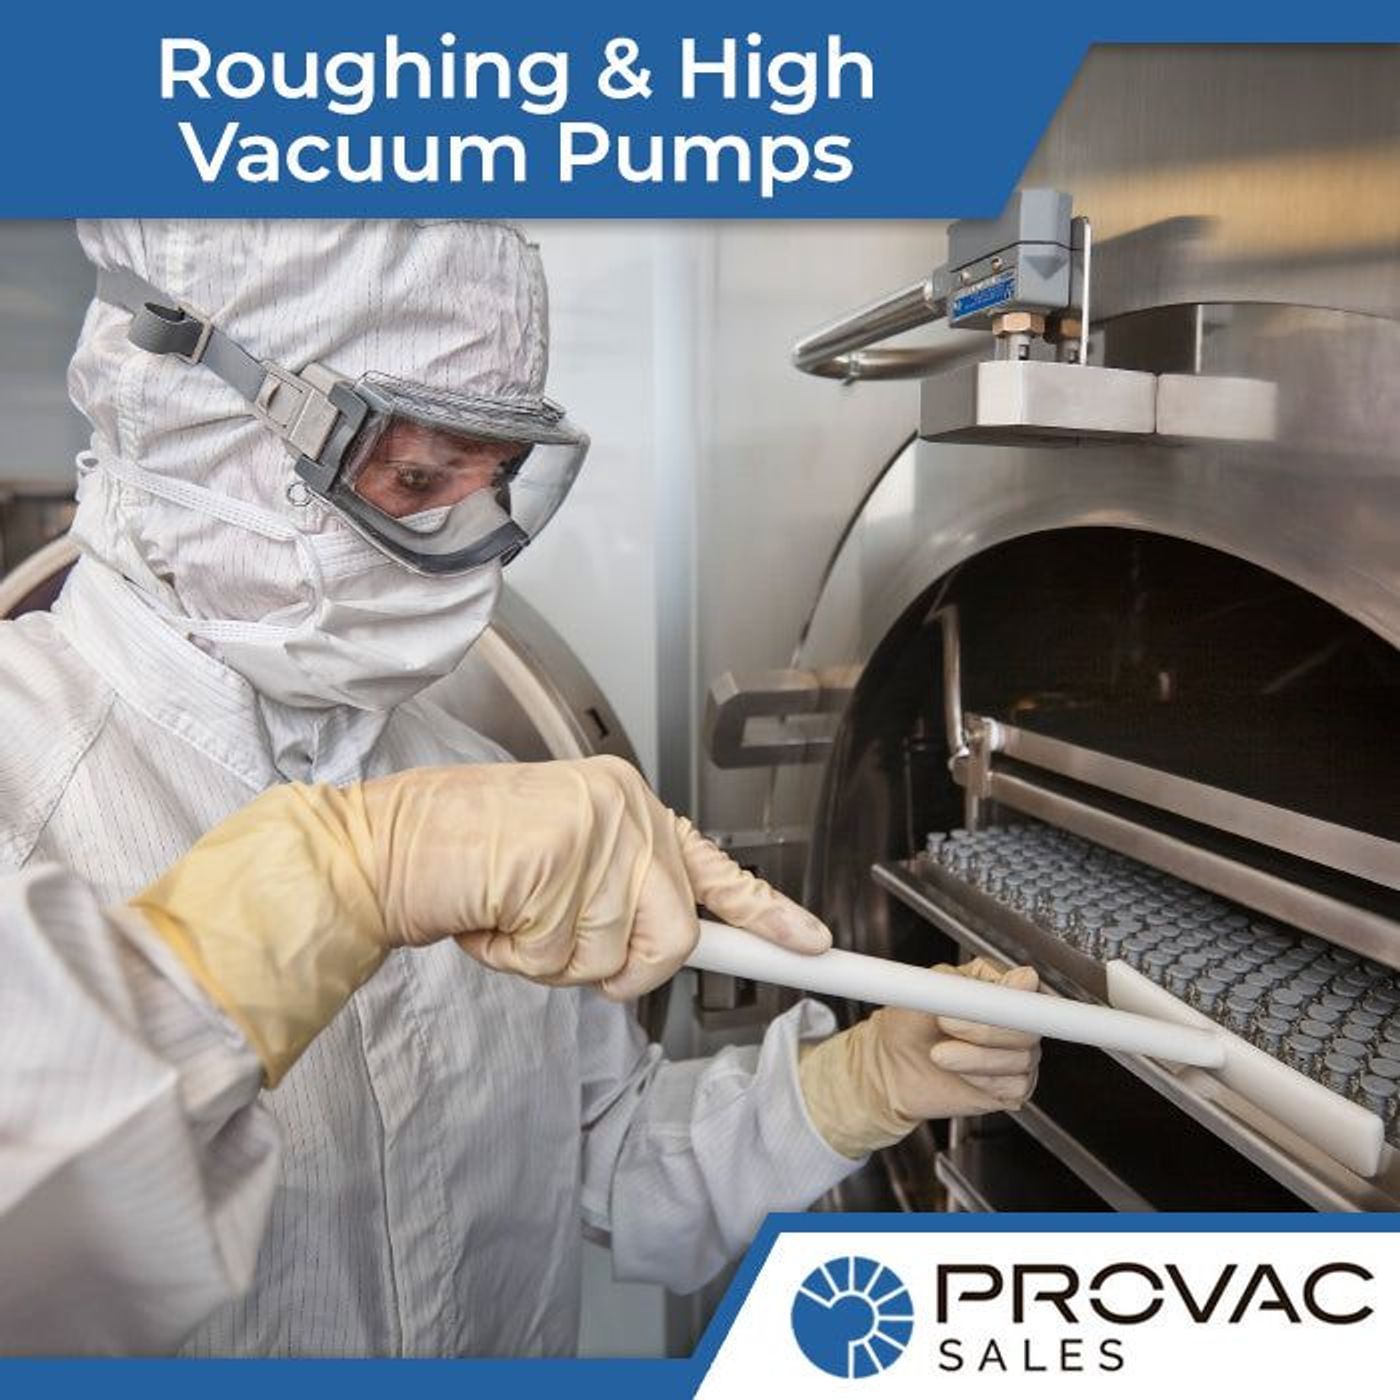 Roughing & High Vacuum Pumps for Your Laboratory & R&D Applications